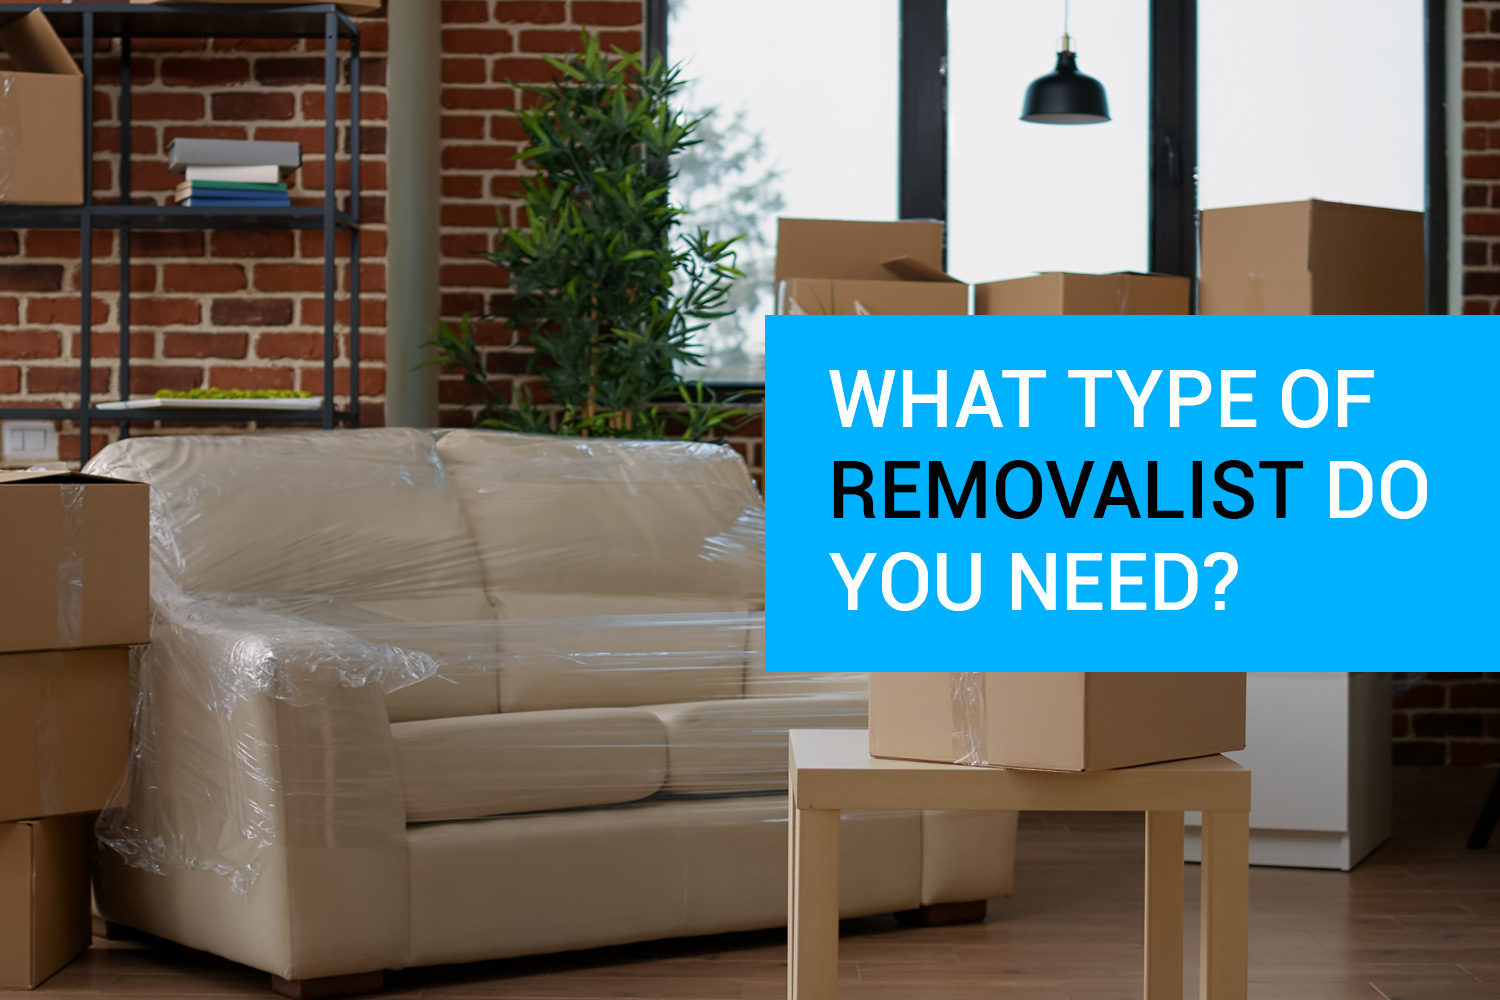 What Type of Removalist Do You Need? Finding the Right Team for Your Job